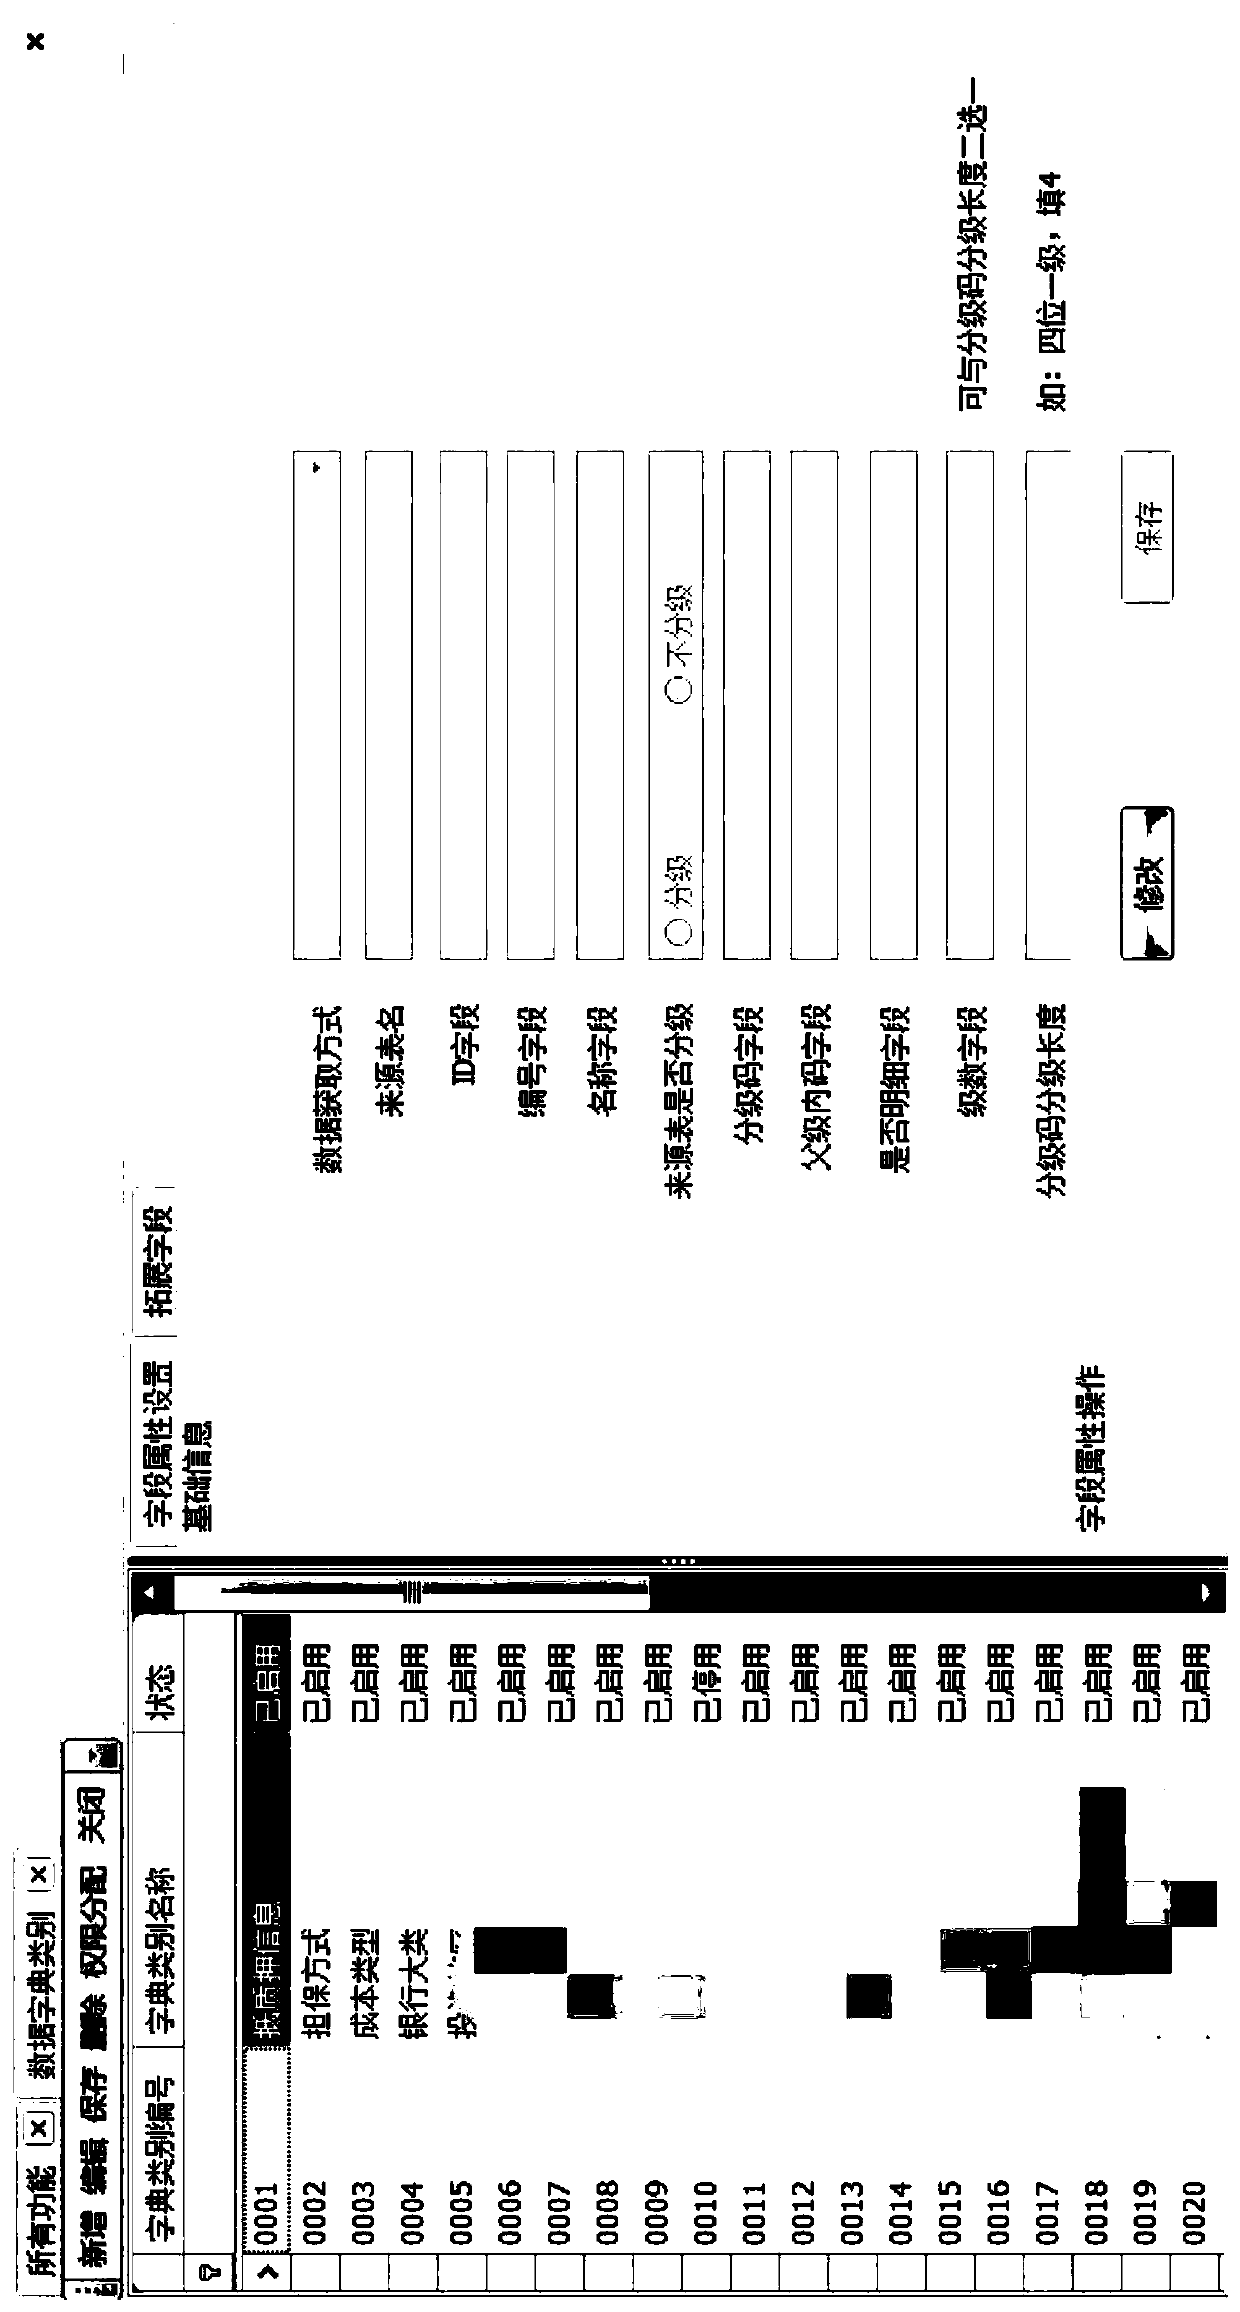 Tree data dictionary maintenance system and method